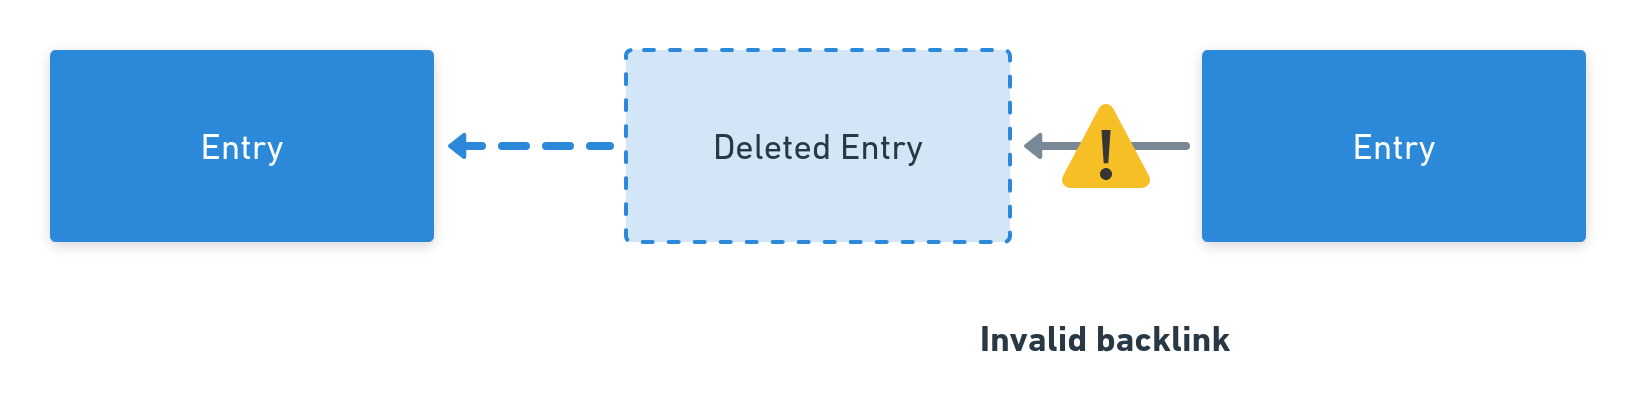 Trying to delete an Entry